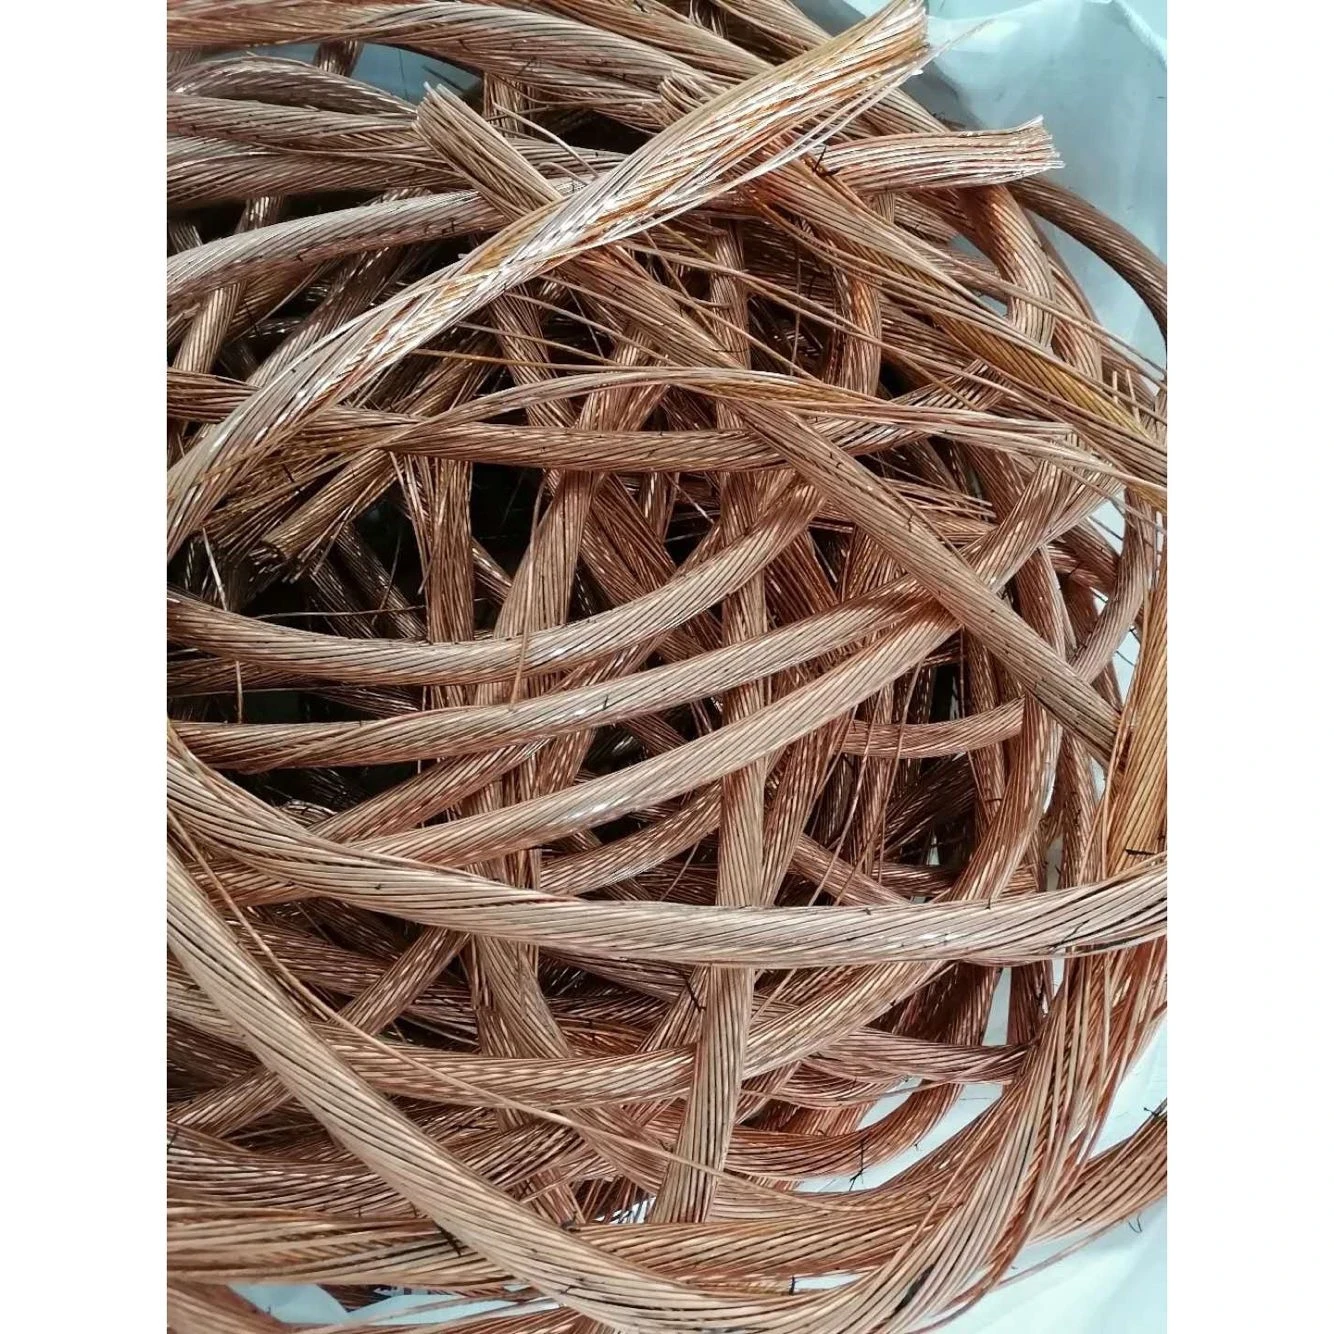 High copper content 99.99 purity waste copper wire